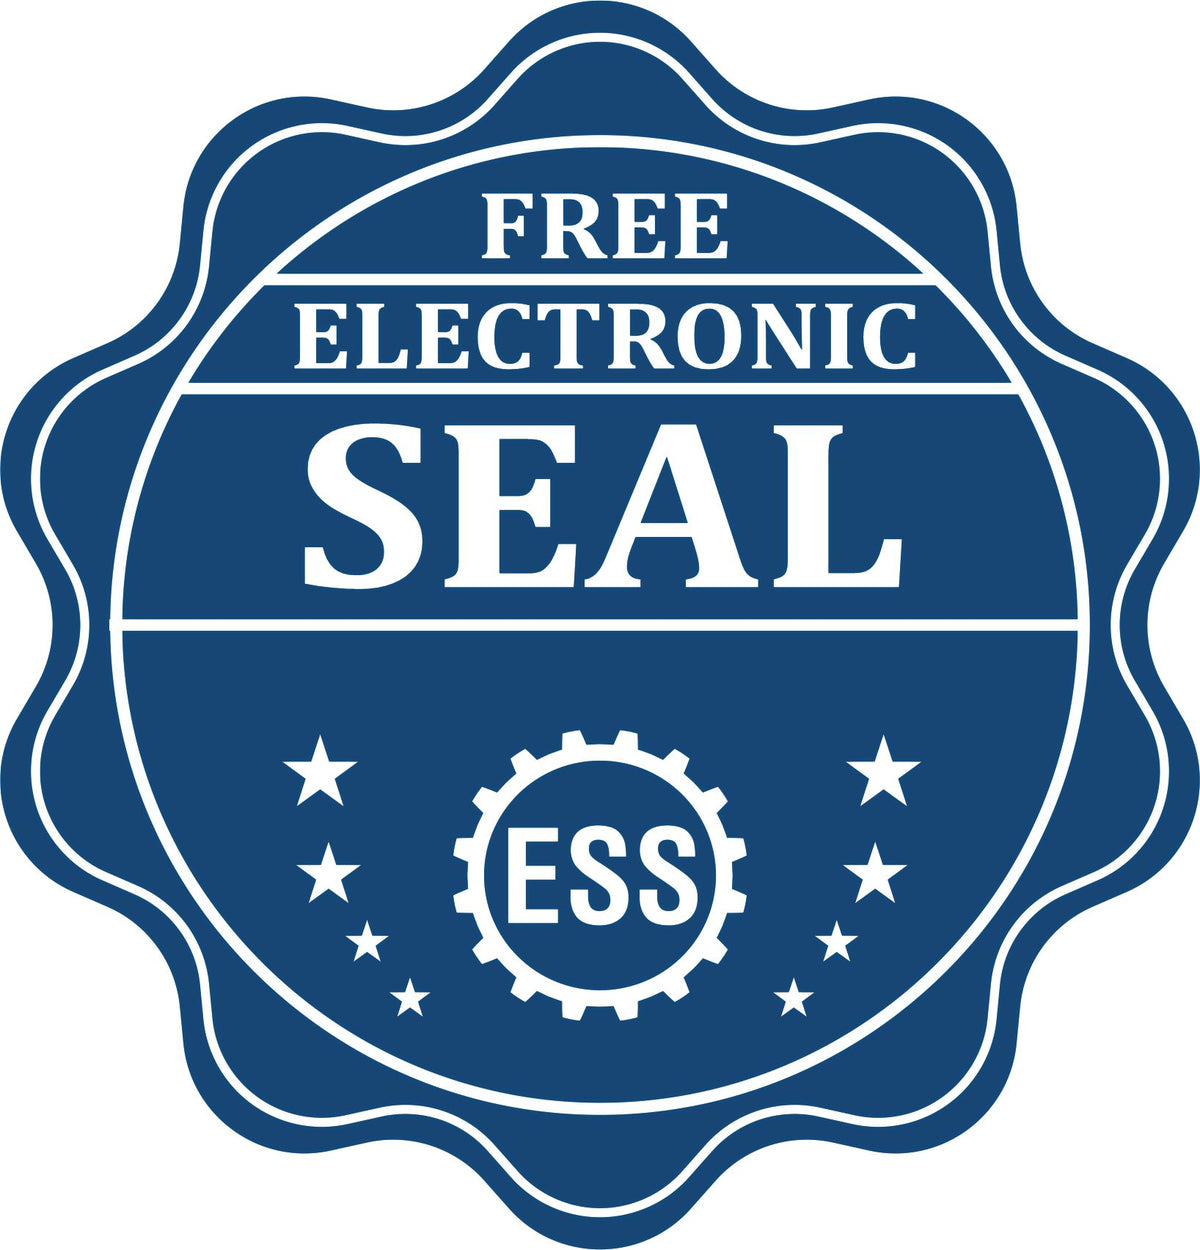 A badge showing a free electronic seal for the Heavy Duty Cast Iron Maryland Architect Embosser with stars and the ESS gear on the emblem.